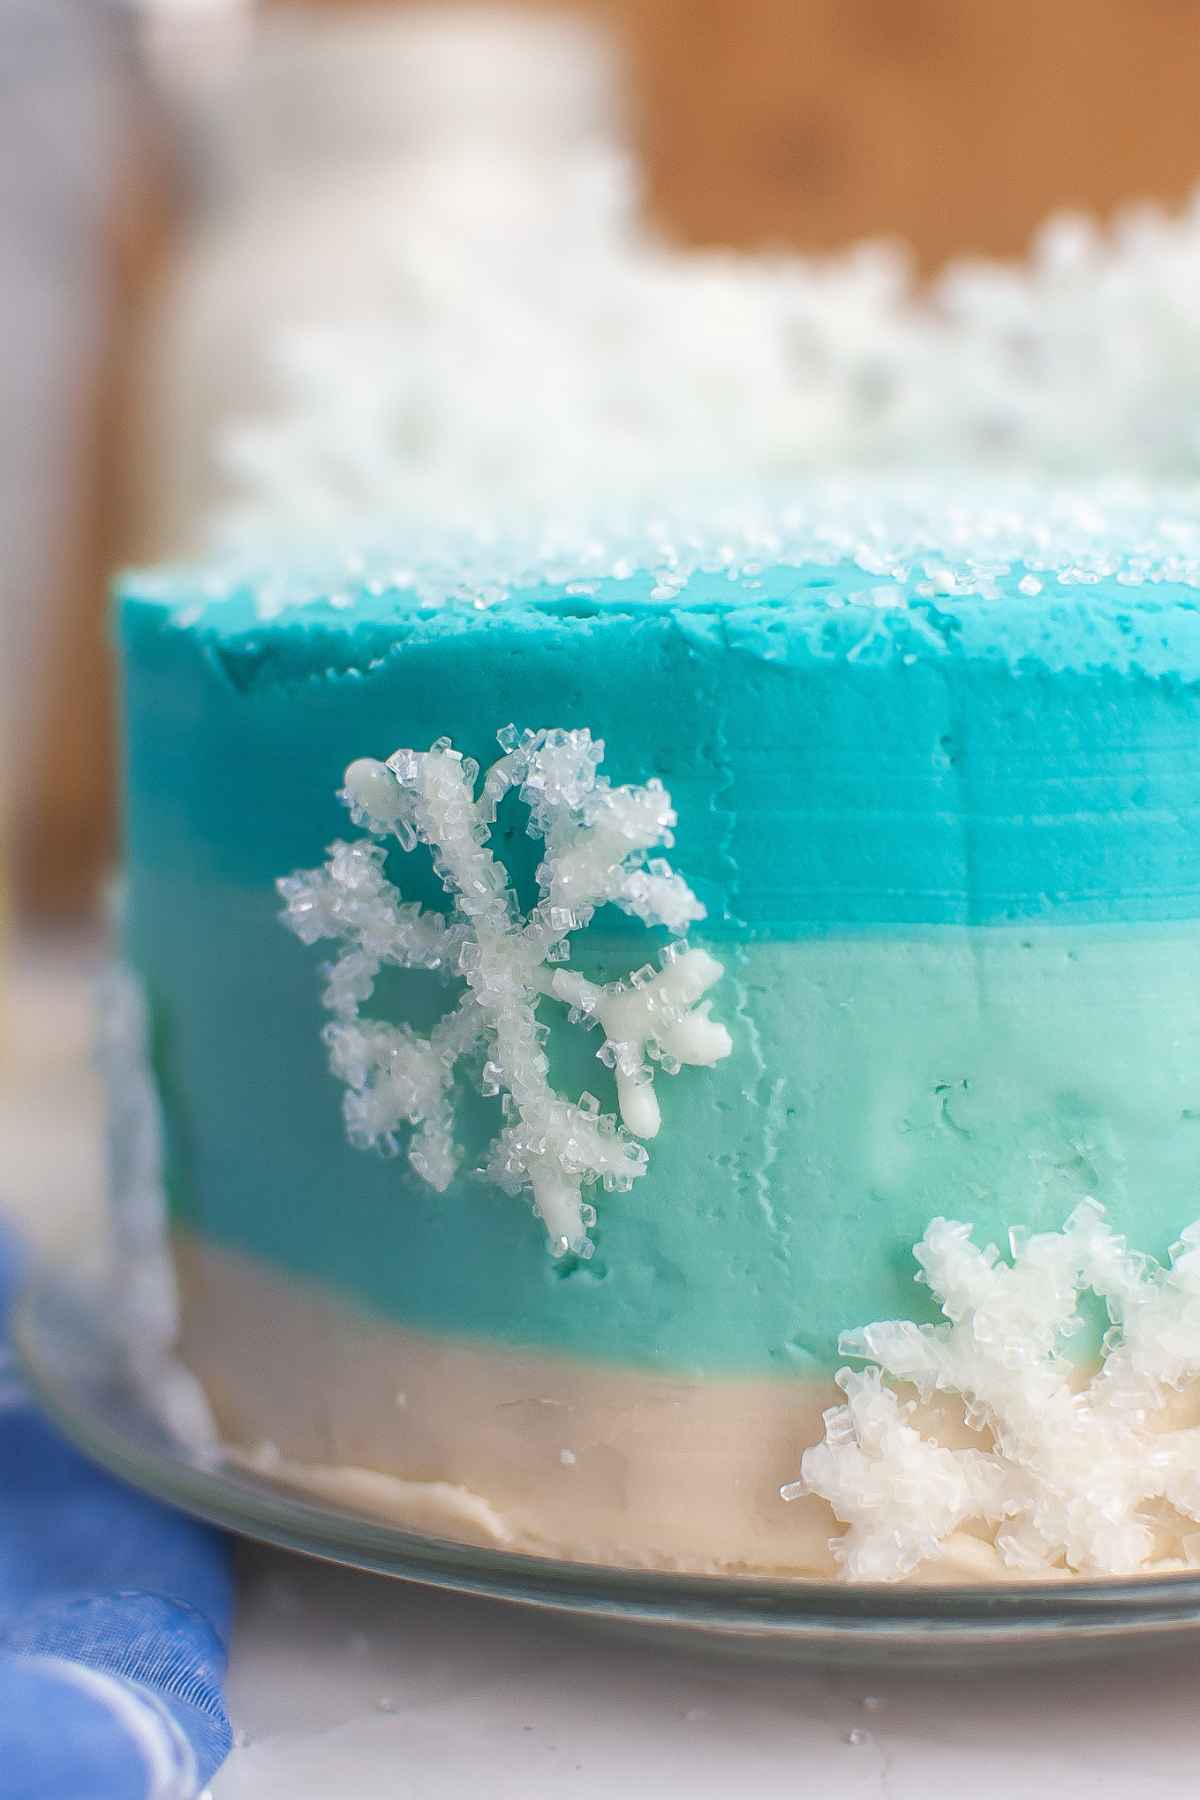 Up close image of winter wonderland cake with ombre blue frosting and sparkling white chocolate snowflakes.